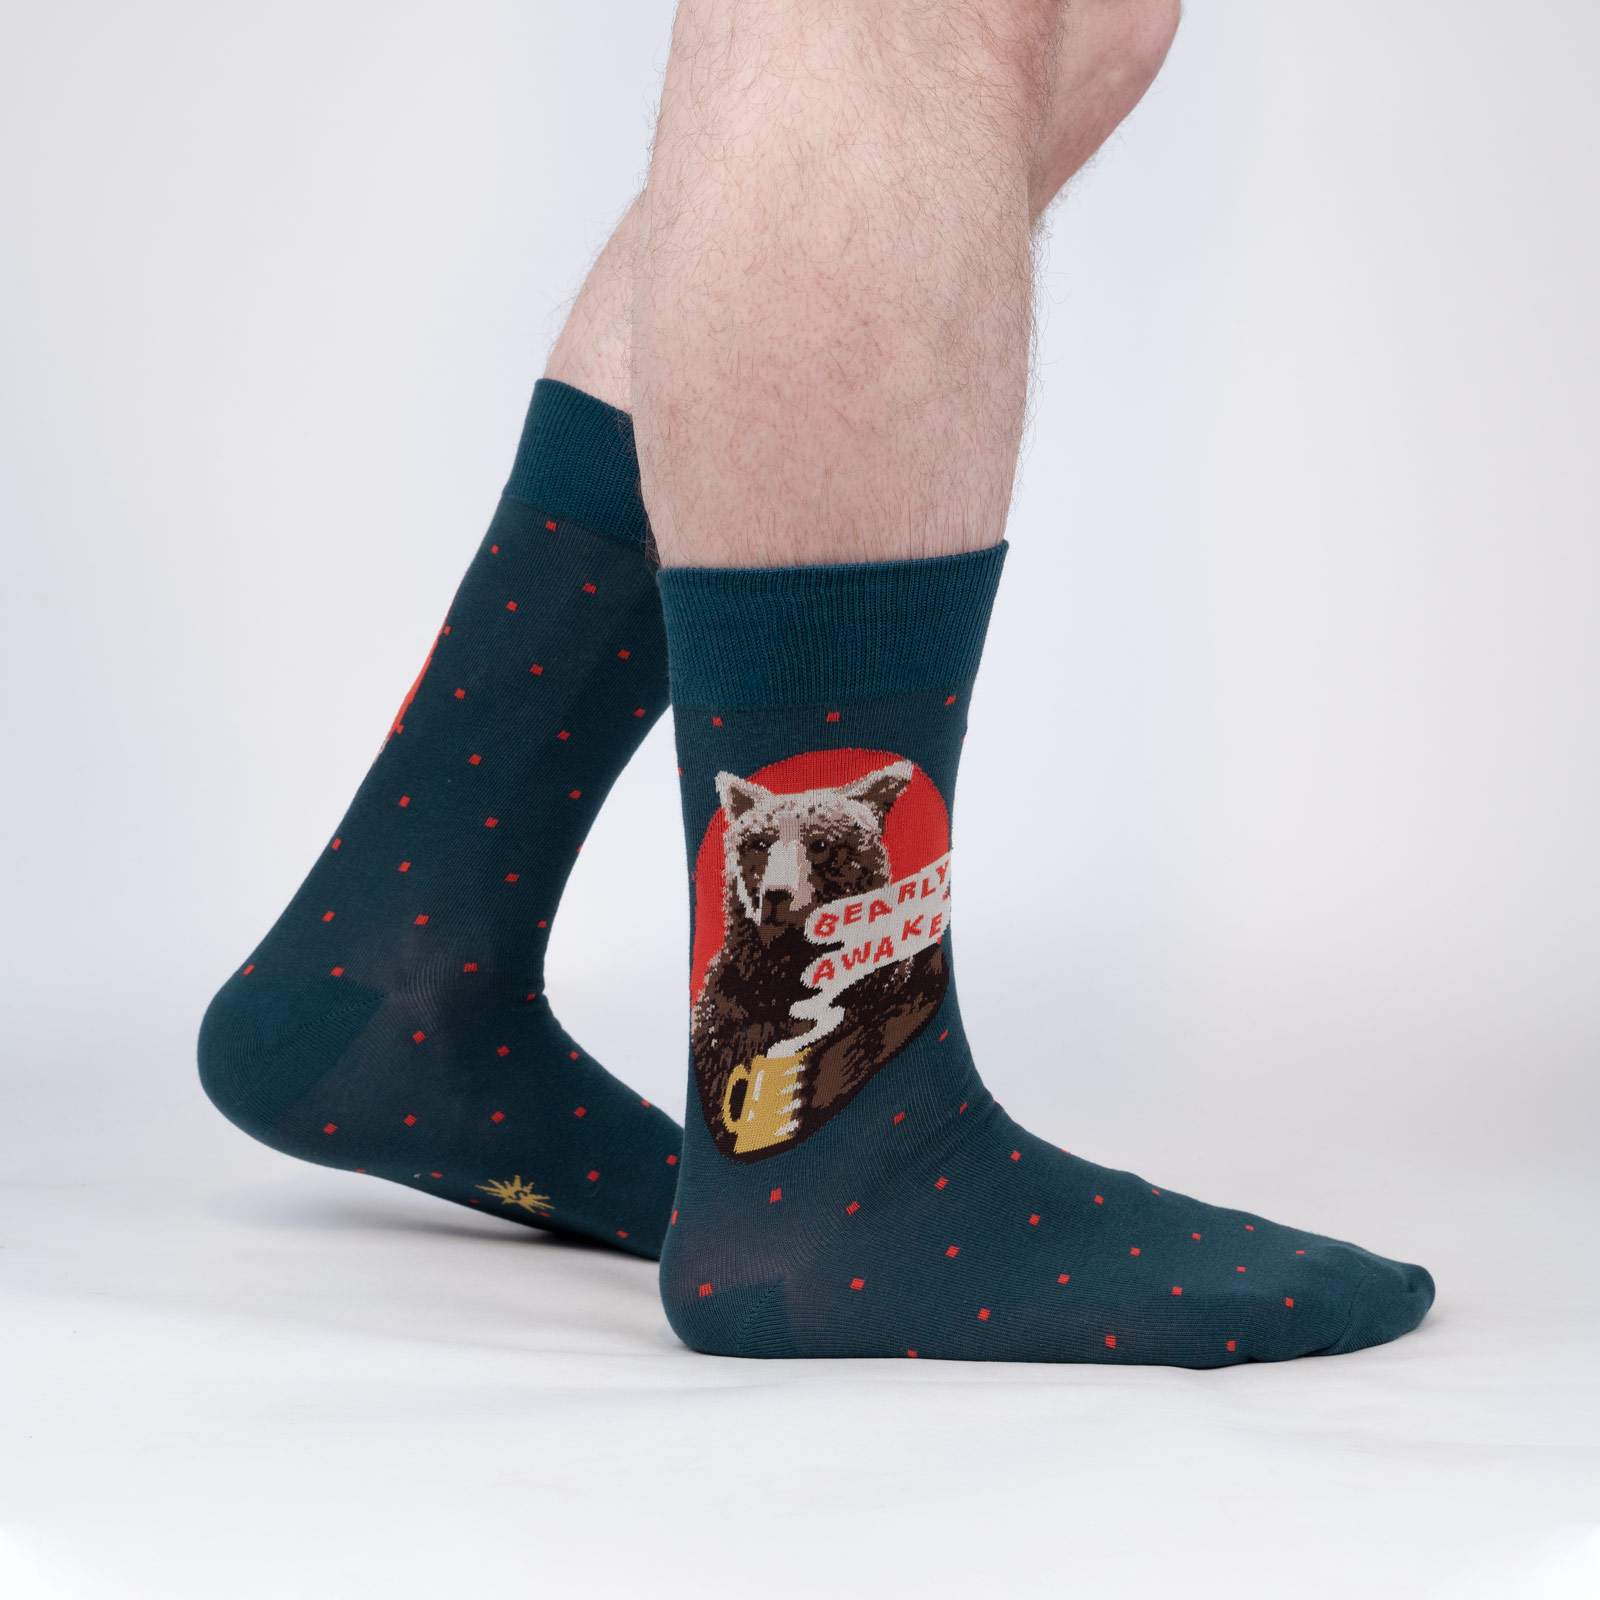 Sock It To Me Bearly Awake women's and men's crew sock featuring blue sock with small red polka dots and picture of bear holding a cup of coffee and the saying "bearly awake". Socks worn by model seen from side.